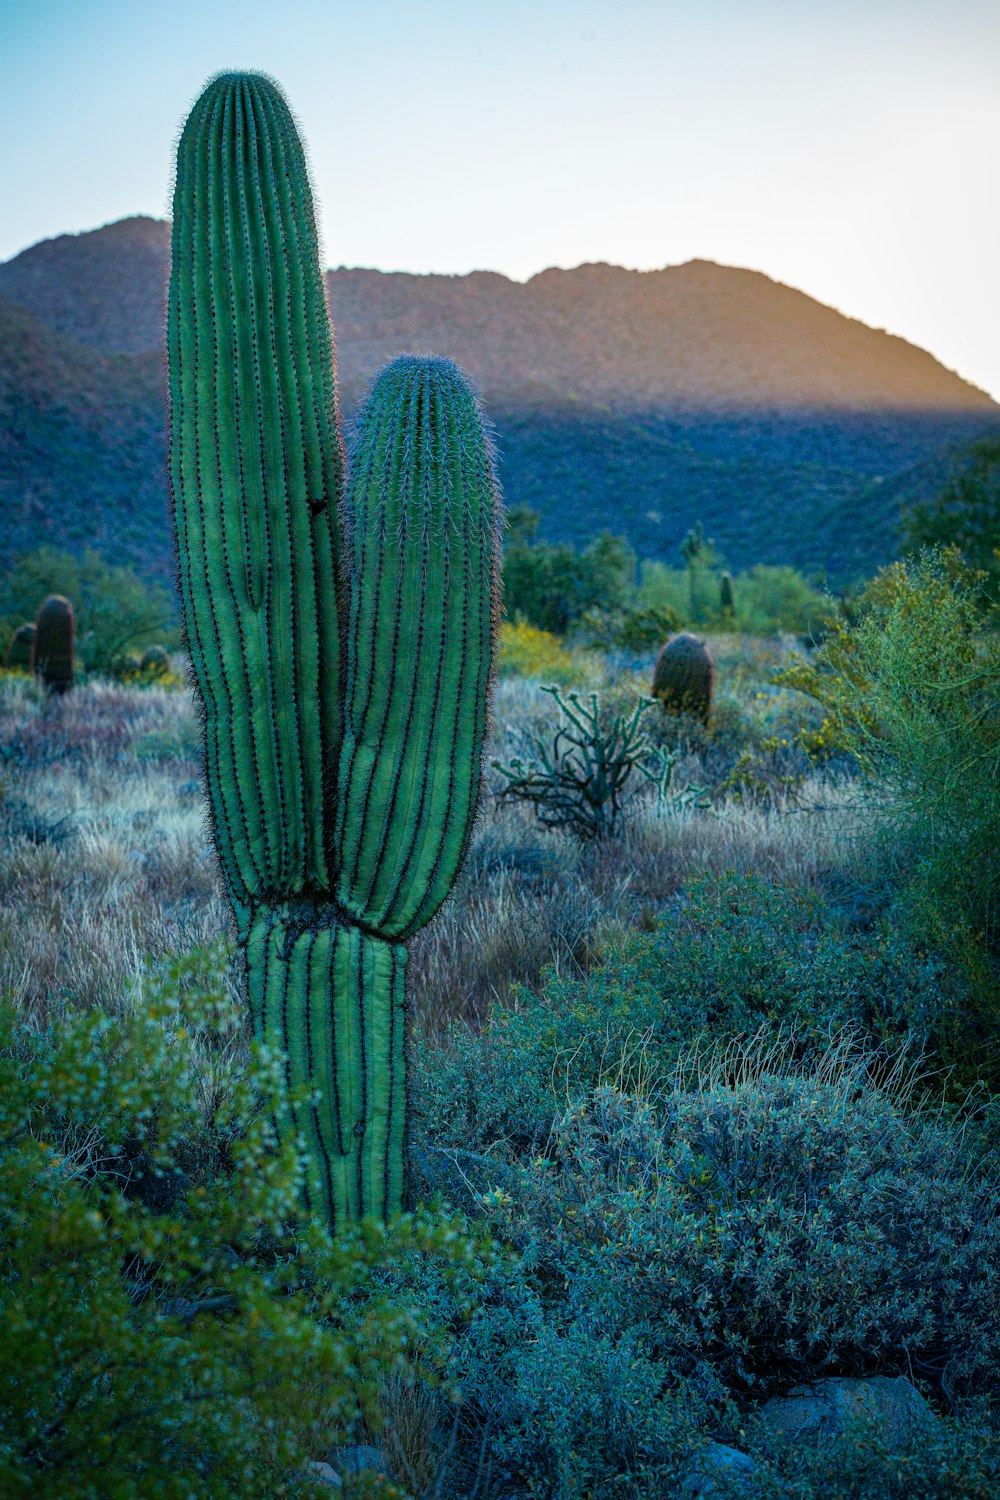 a large green cactus standing in the middle of a field